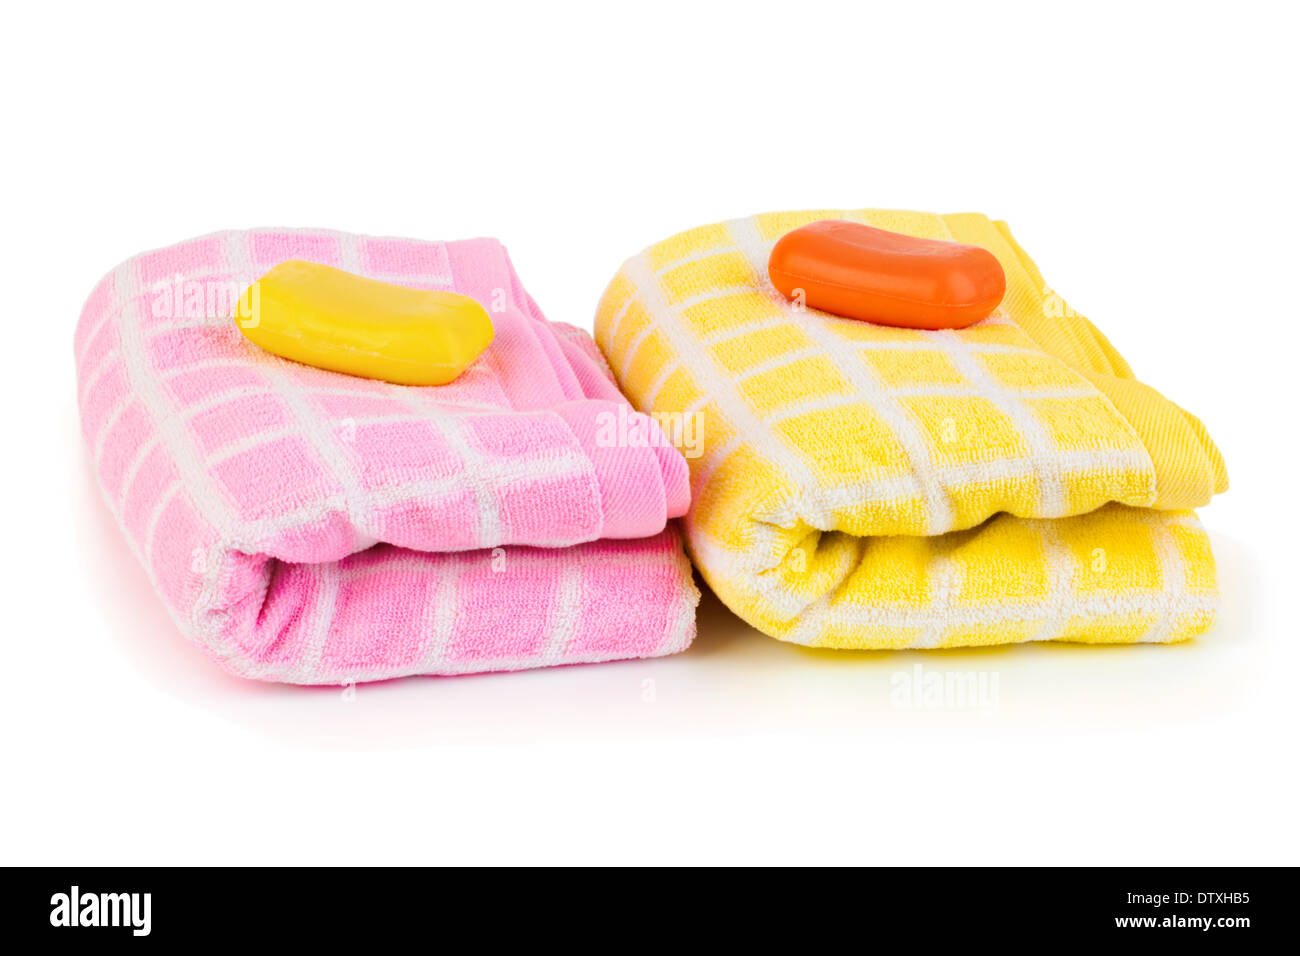 Towels and soap Stock Photo